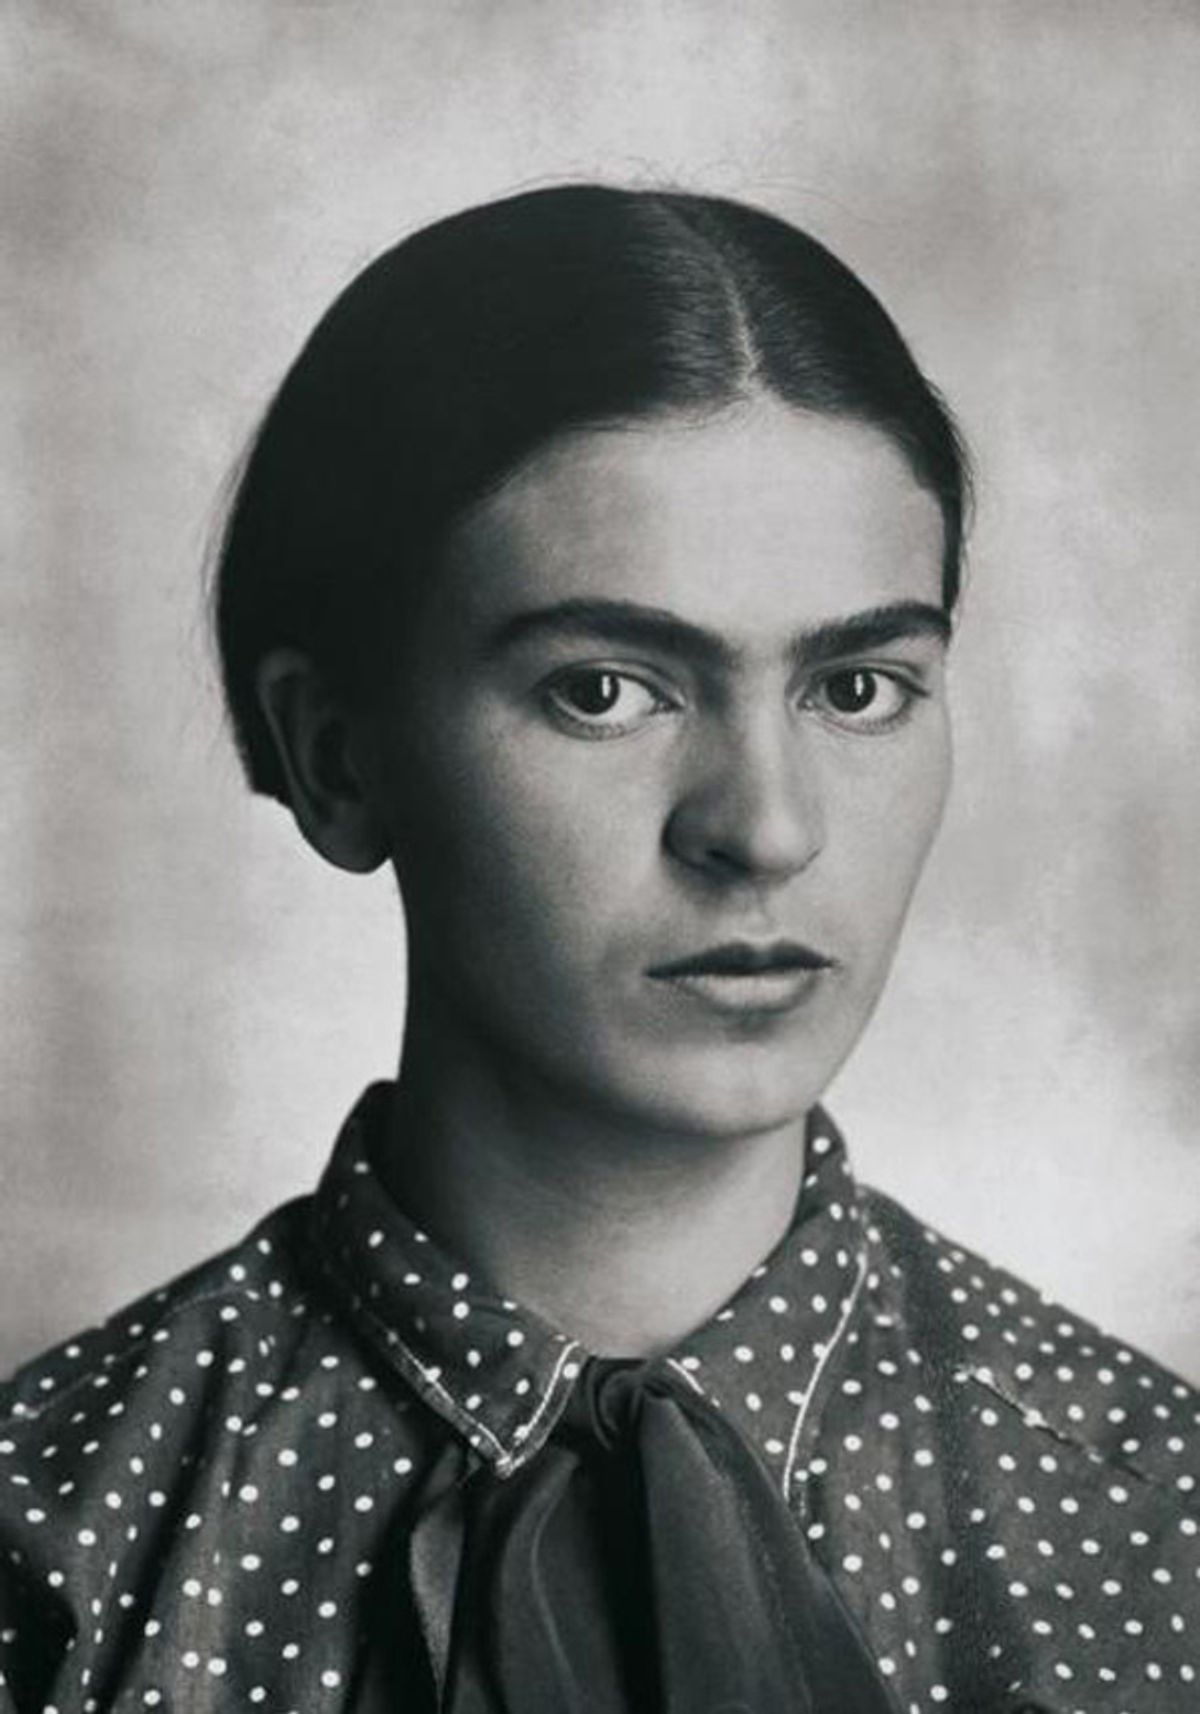 Frida Kahlo photographed by Guillermo Kahlo in 1926 